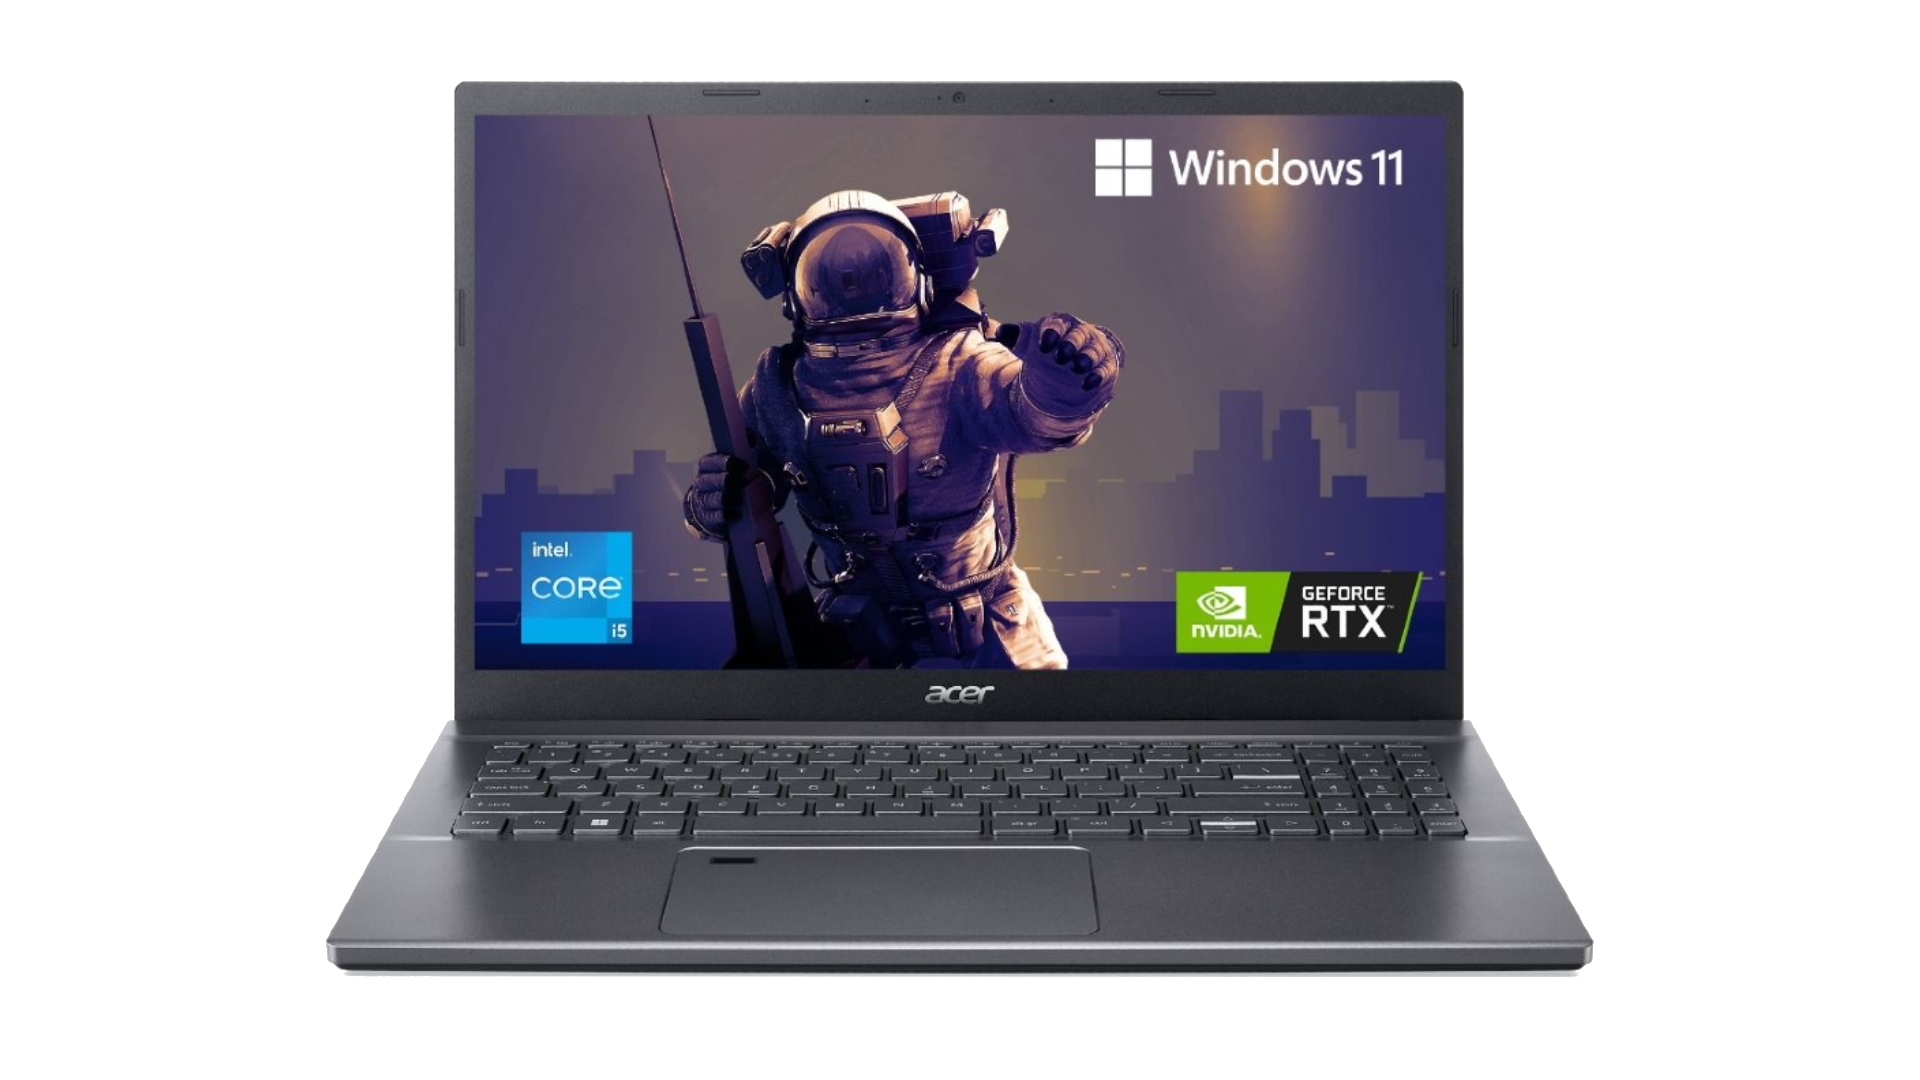 Acer Aspire 5 budget gaming laptop launched in India. It runs on 12th Gen Intel i5 chipset along with RTX 2050 GPU.